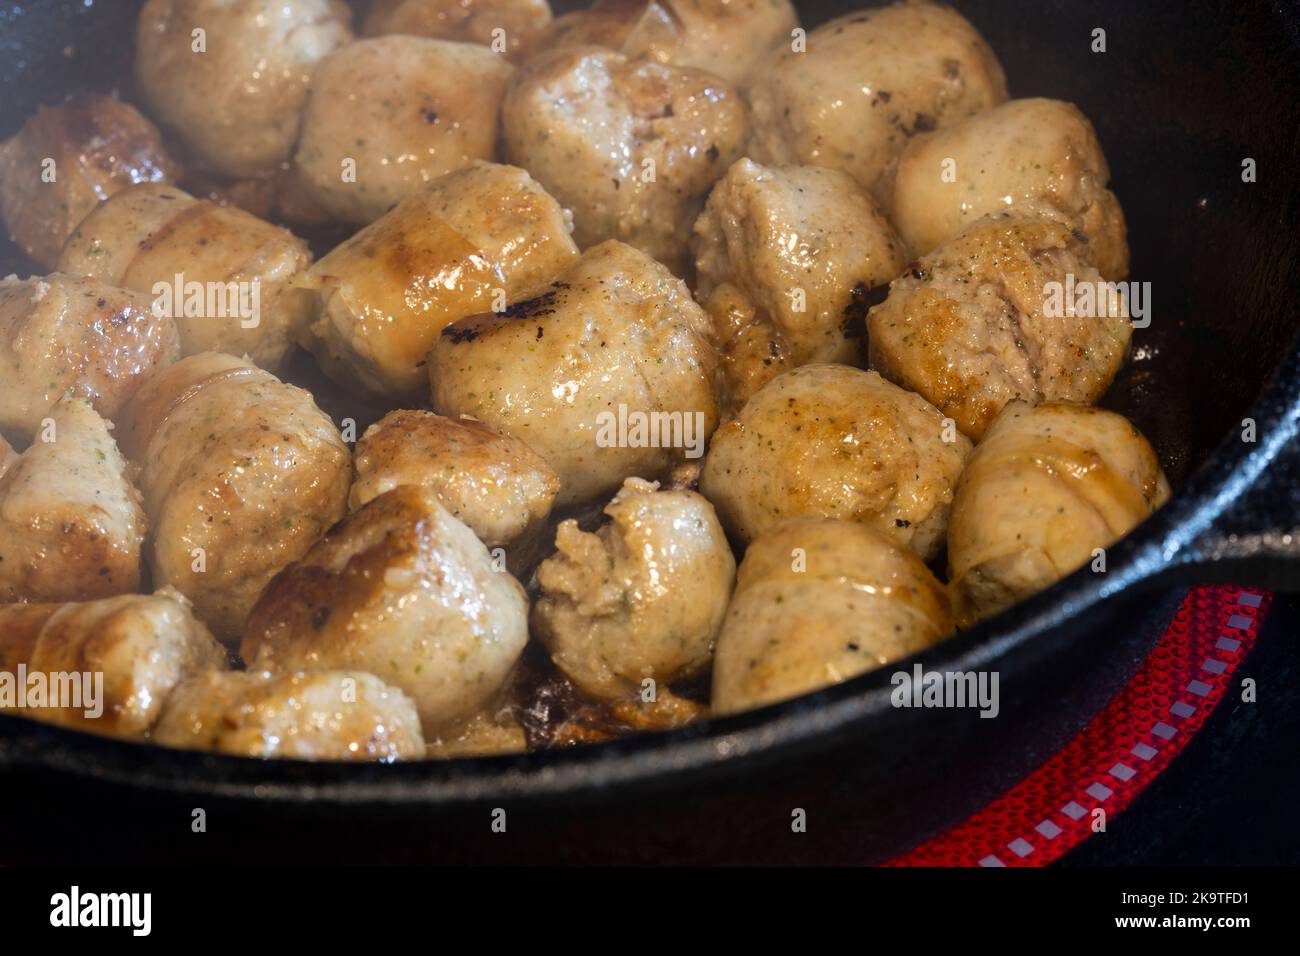 Frying pork sausage meat balls, with olive oil, in a cast iron frying pan, on an electric hob stove Stock Photo